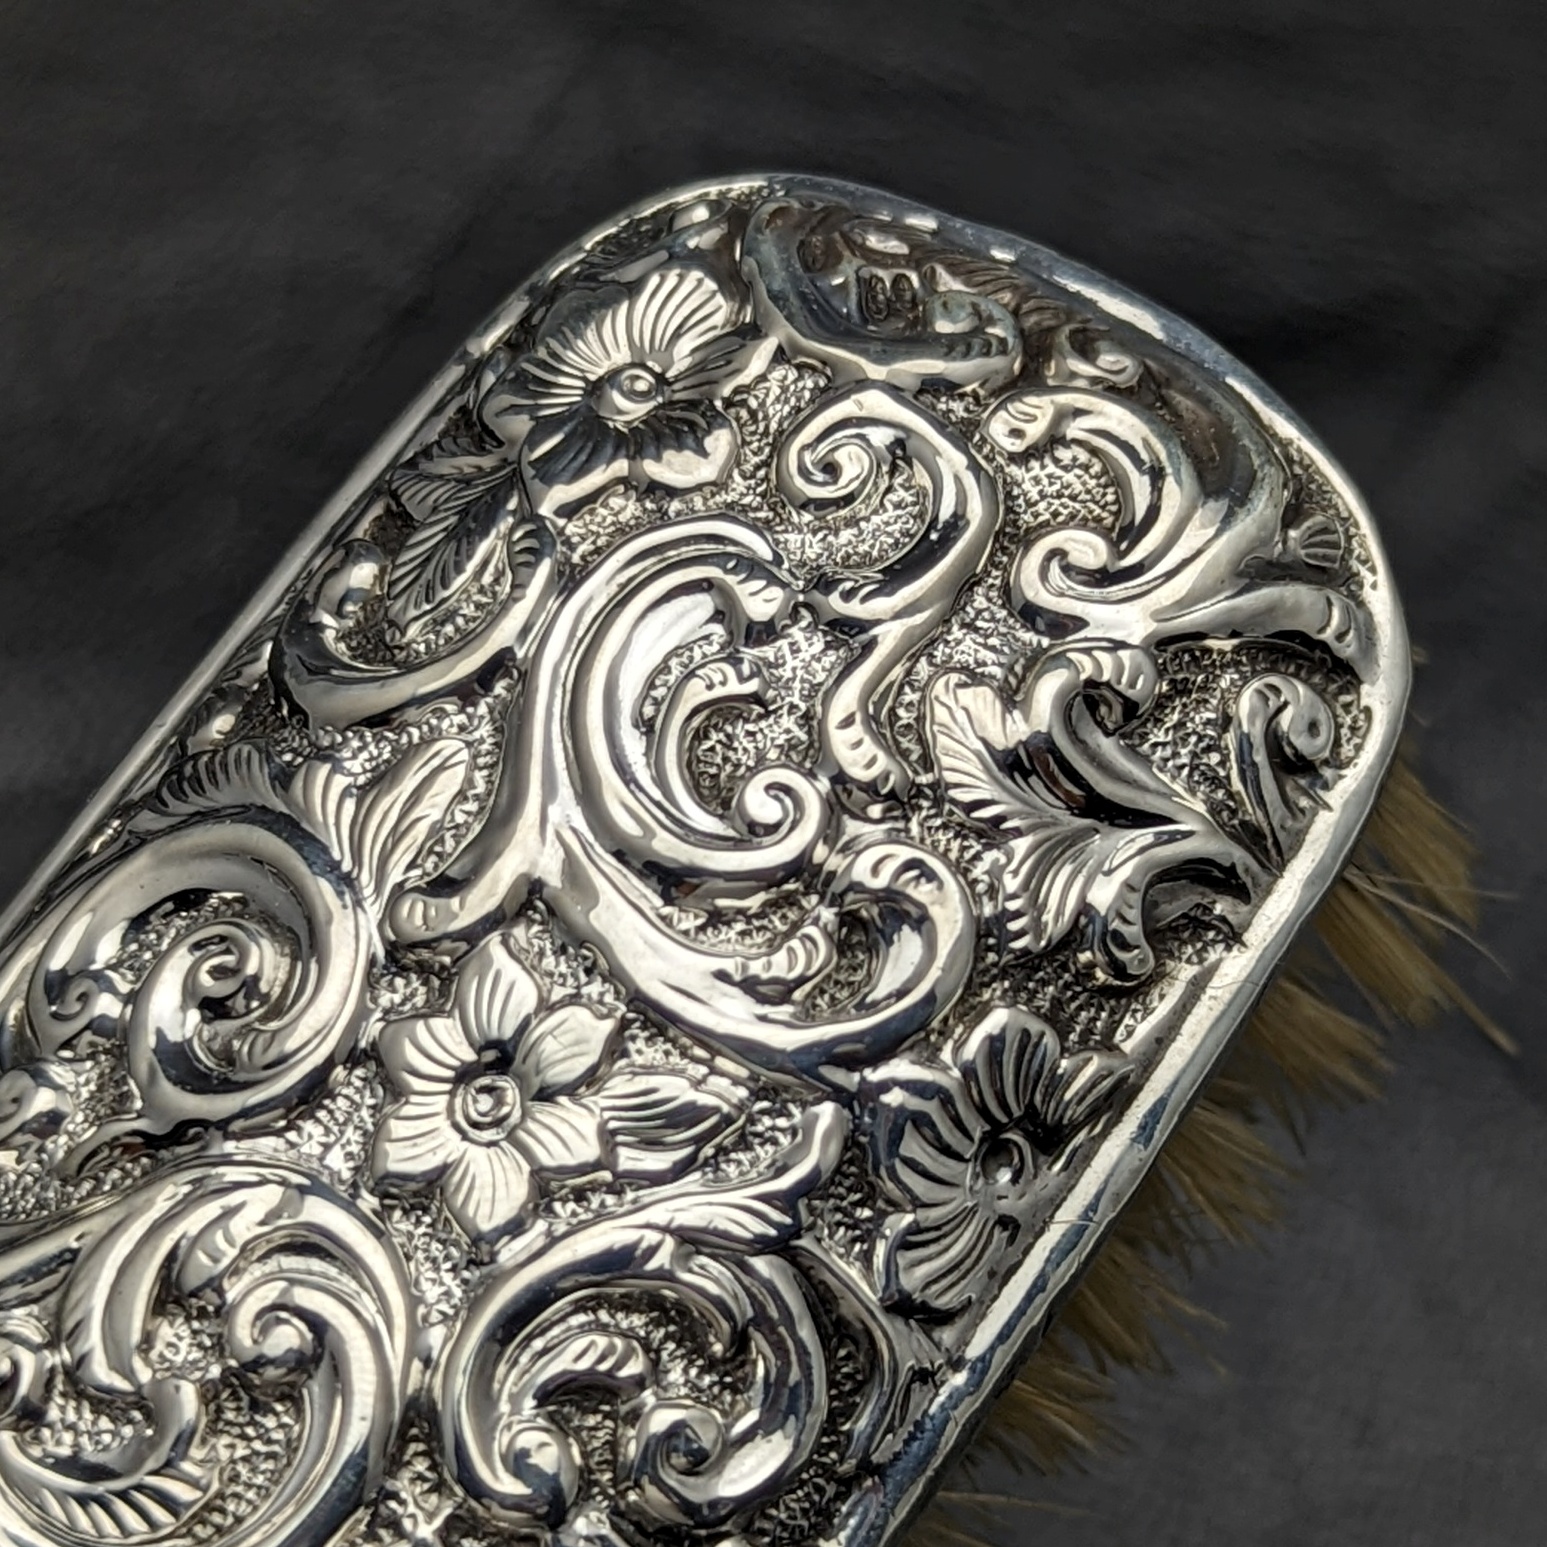 1897 year Britain antique comming off carving sculpture original silver made brush 